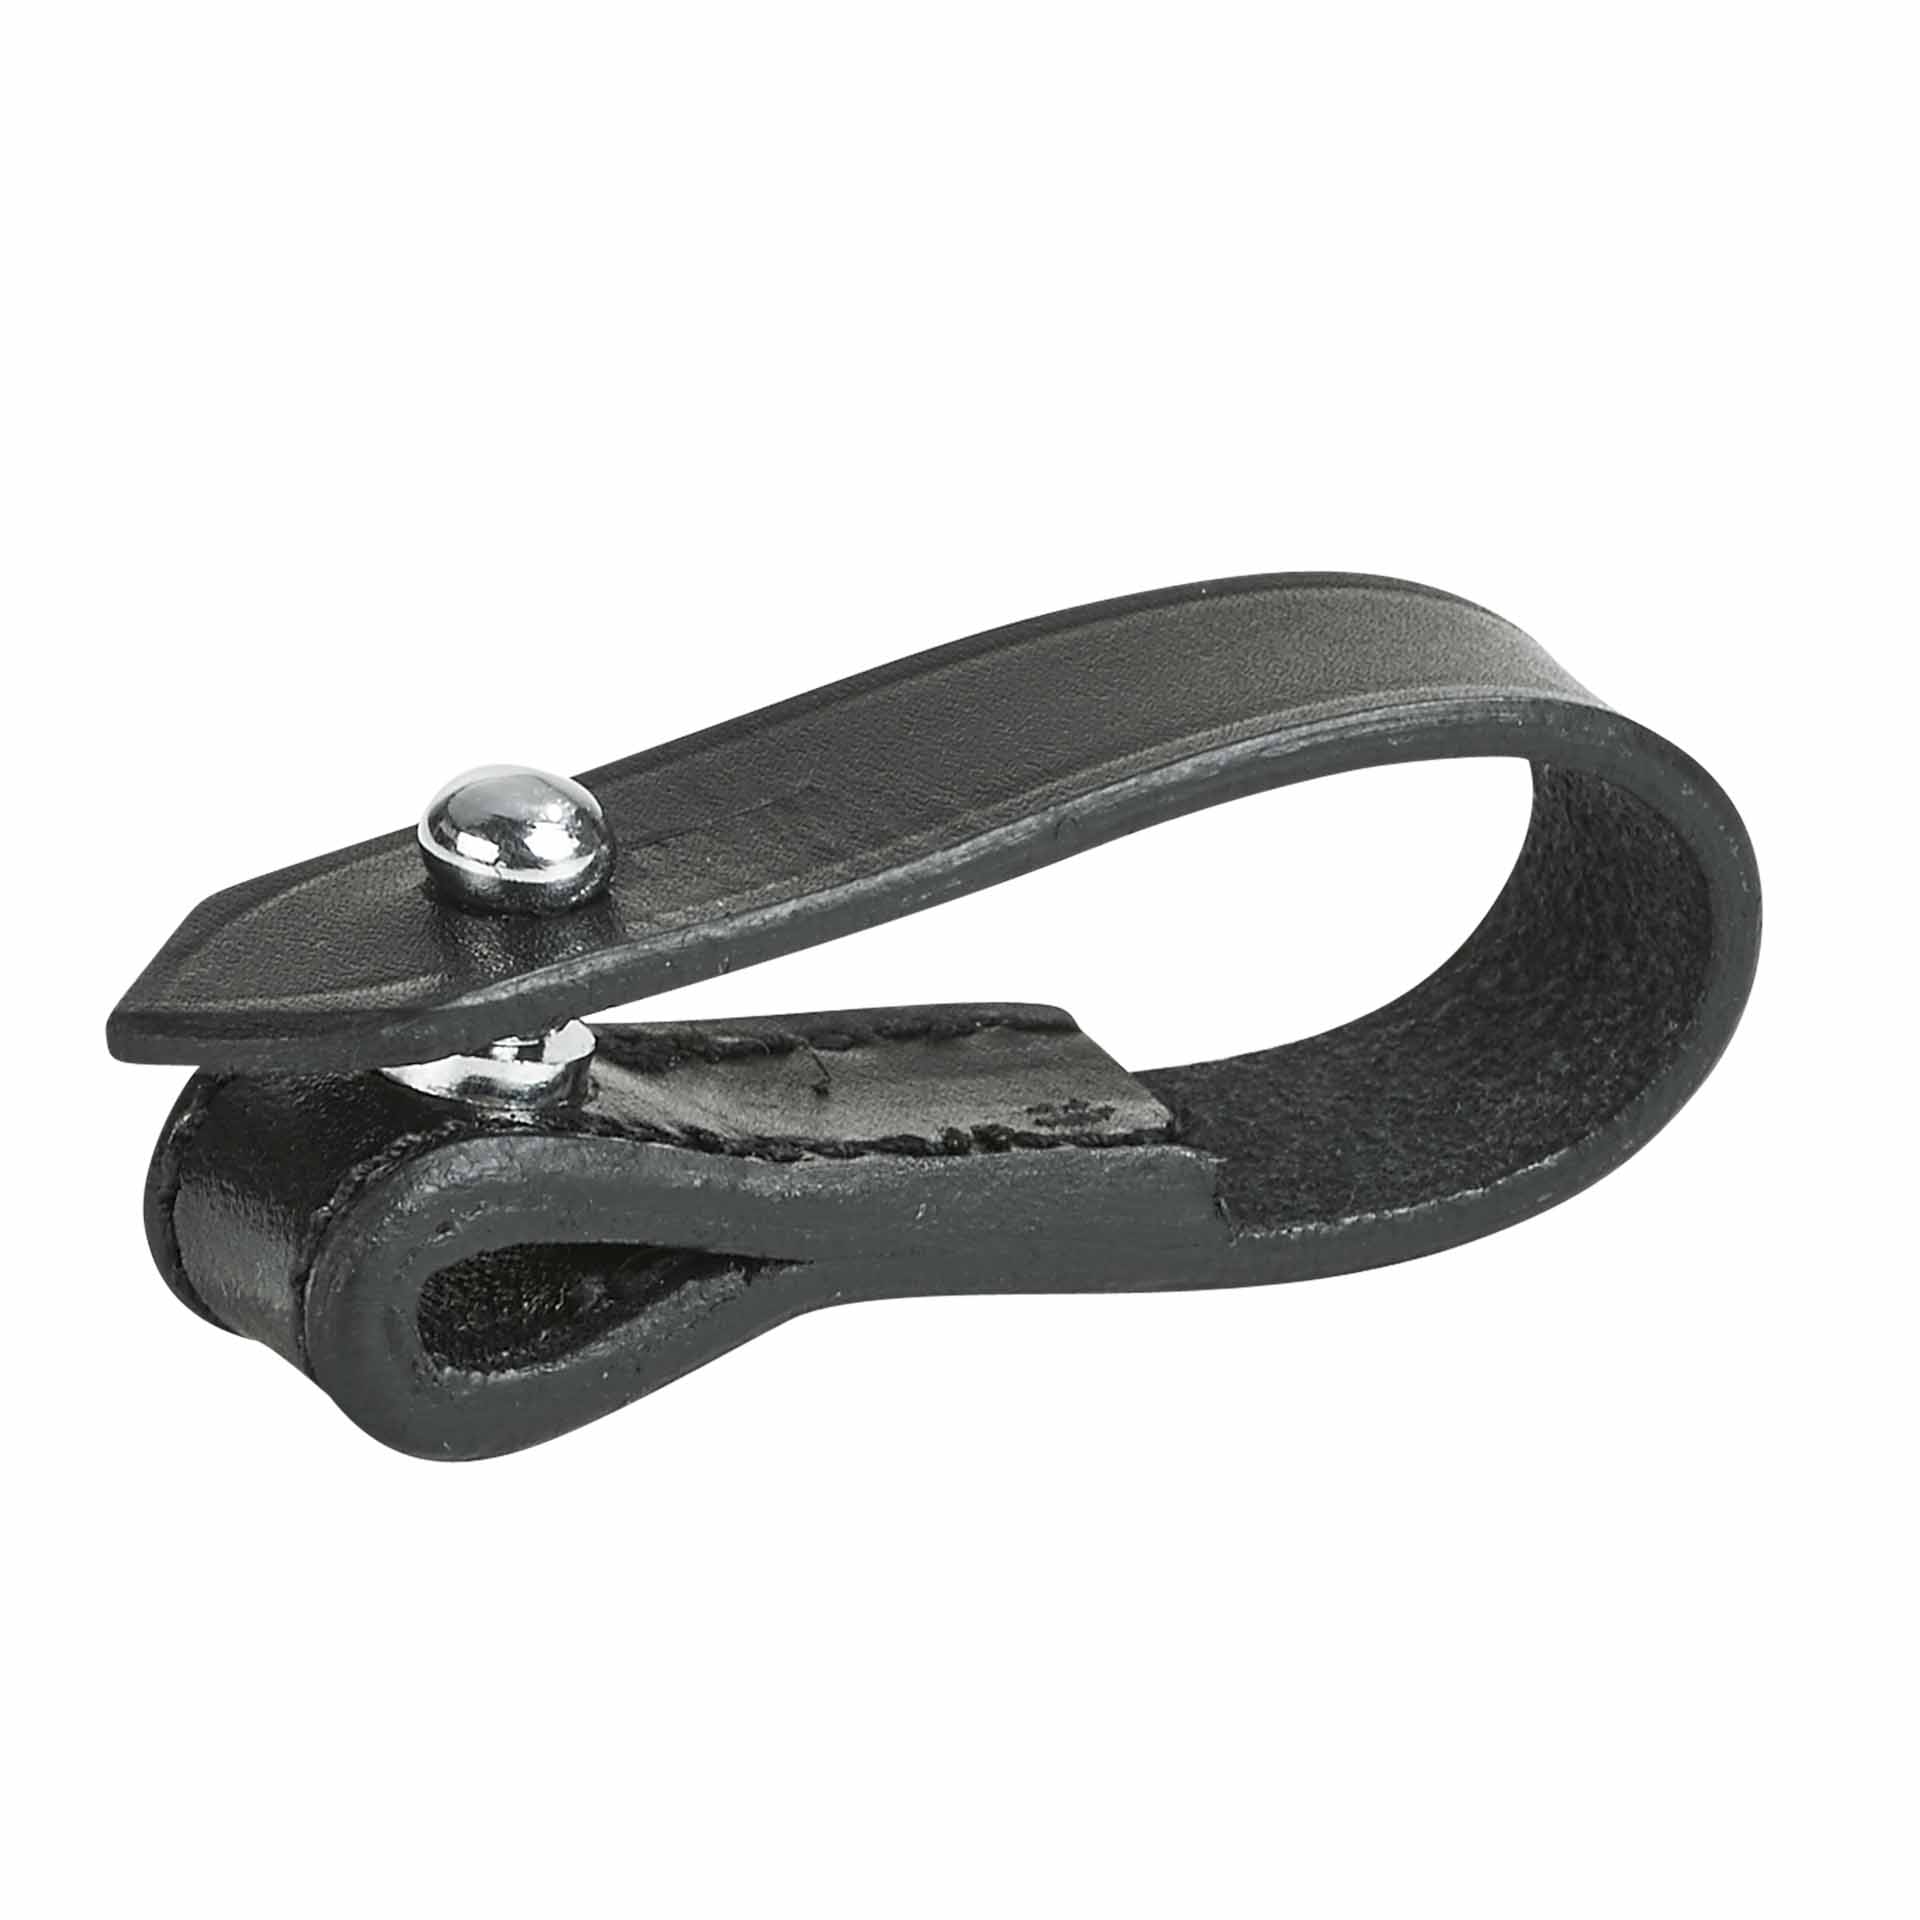 BUSSE Flash Strap Converter CLASSIC black/stainless steel